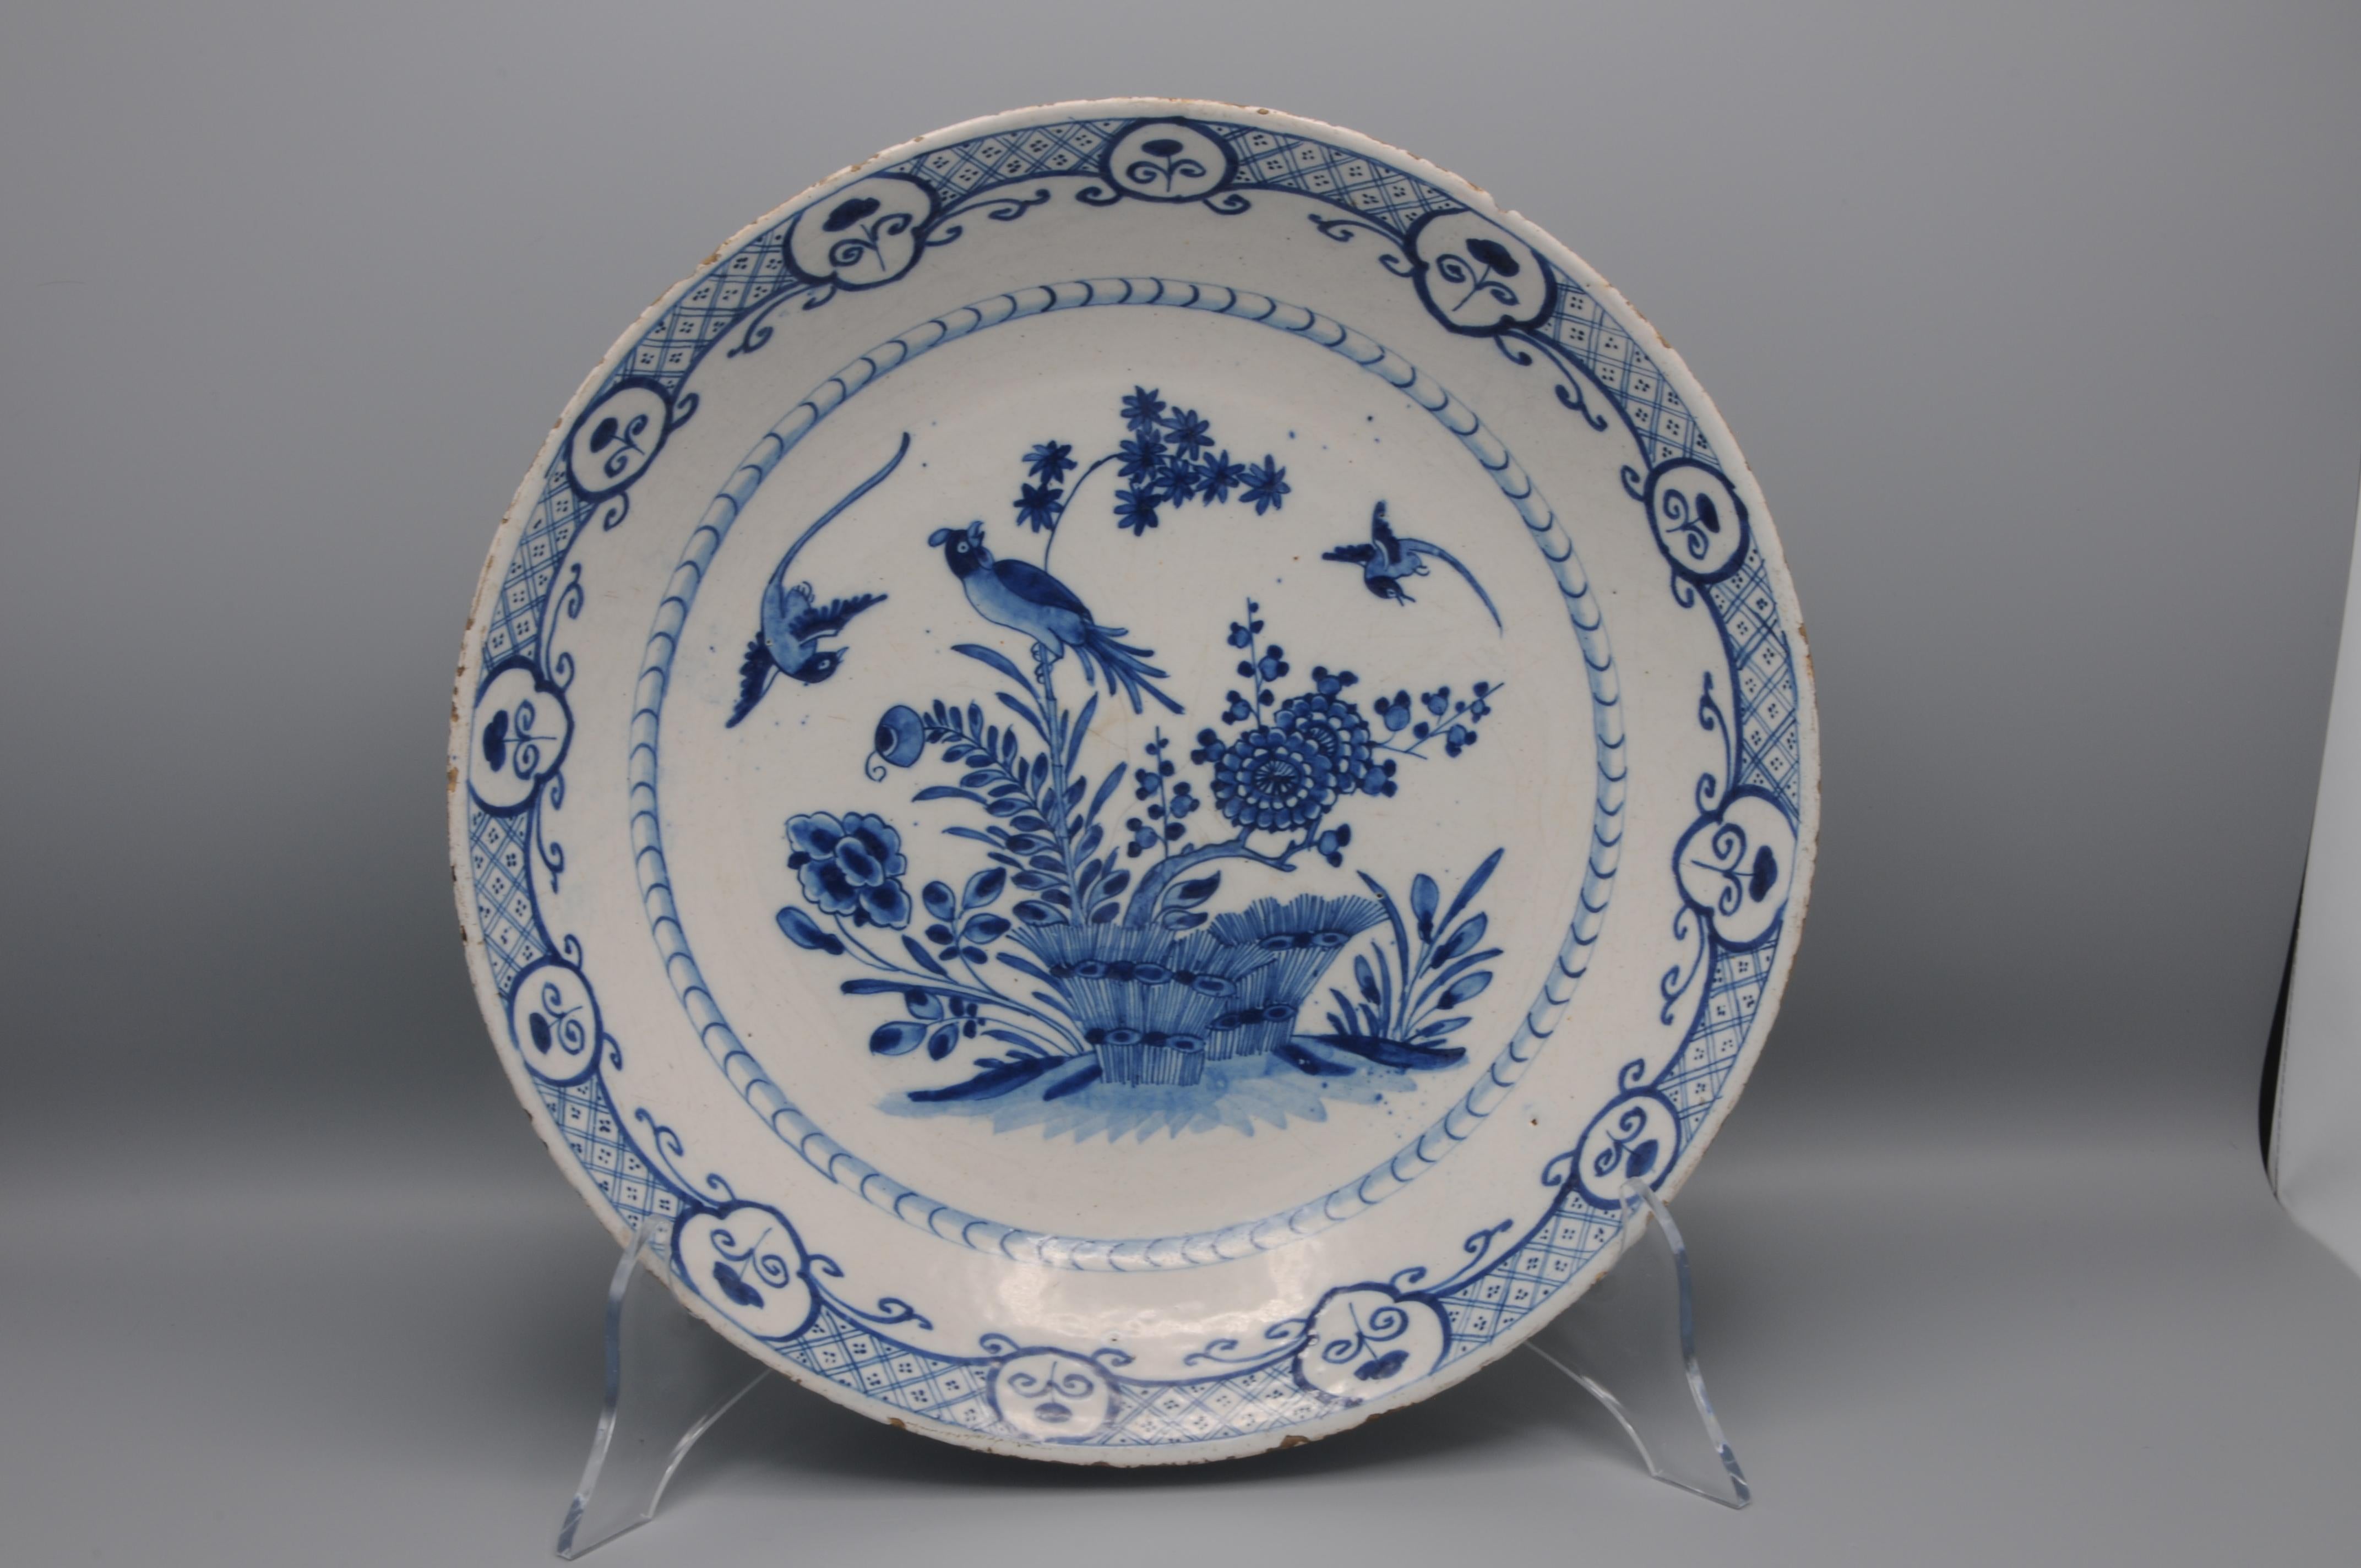 Extraordinary Blue Delftware (deep) platter with chinoiserie decoration of three birds above blossoming peony and flower sprays.
The border and with a decoration of tracery and cartouches. 
marked mark of Jacob van der Kool, De Grieksche A,